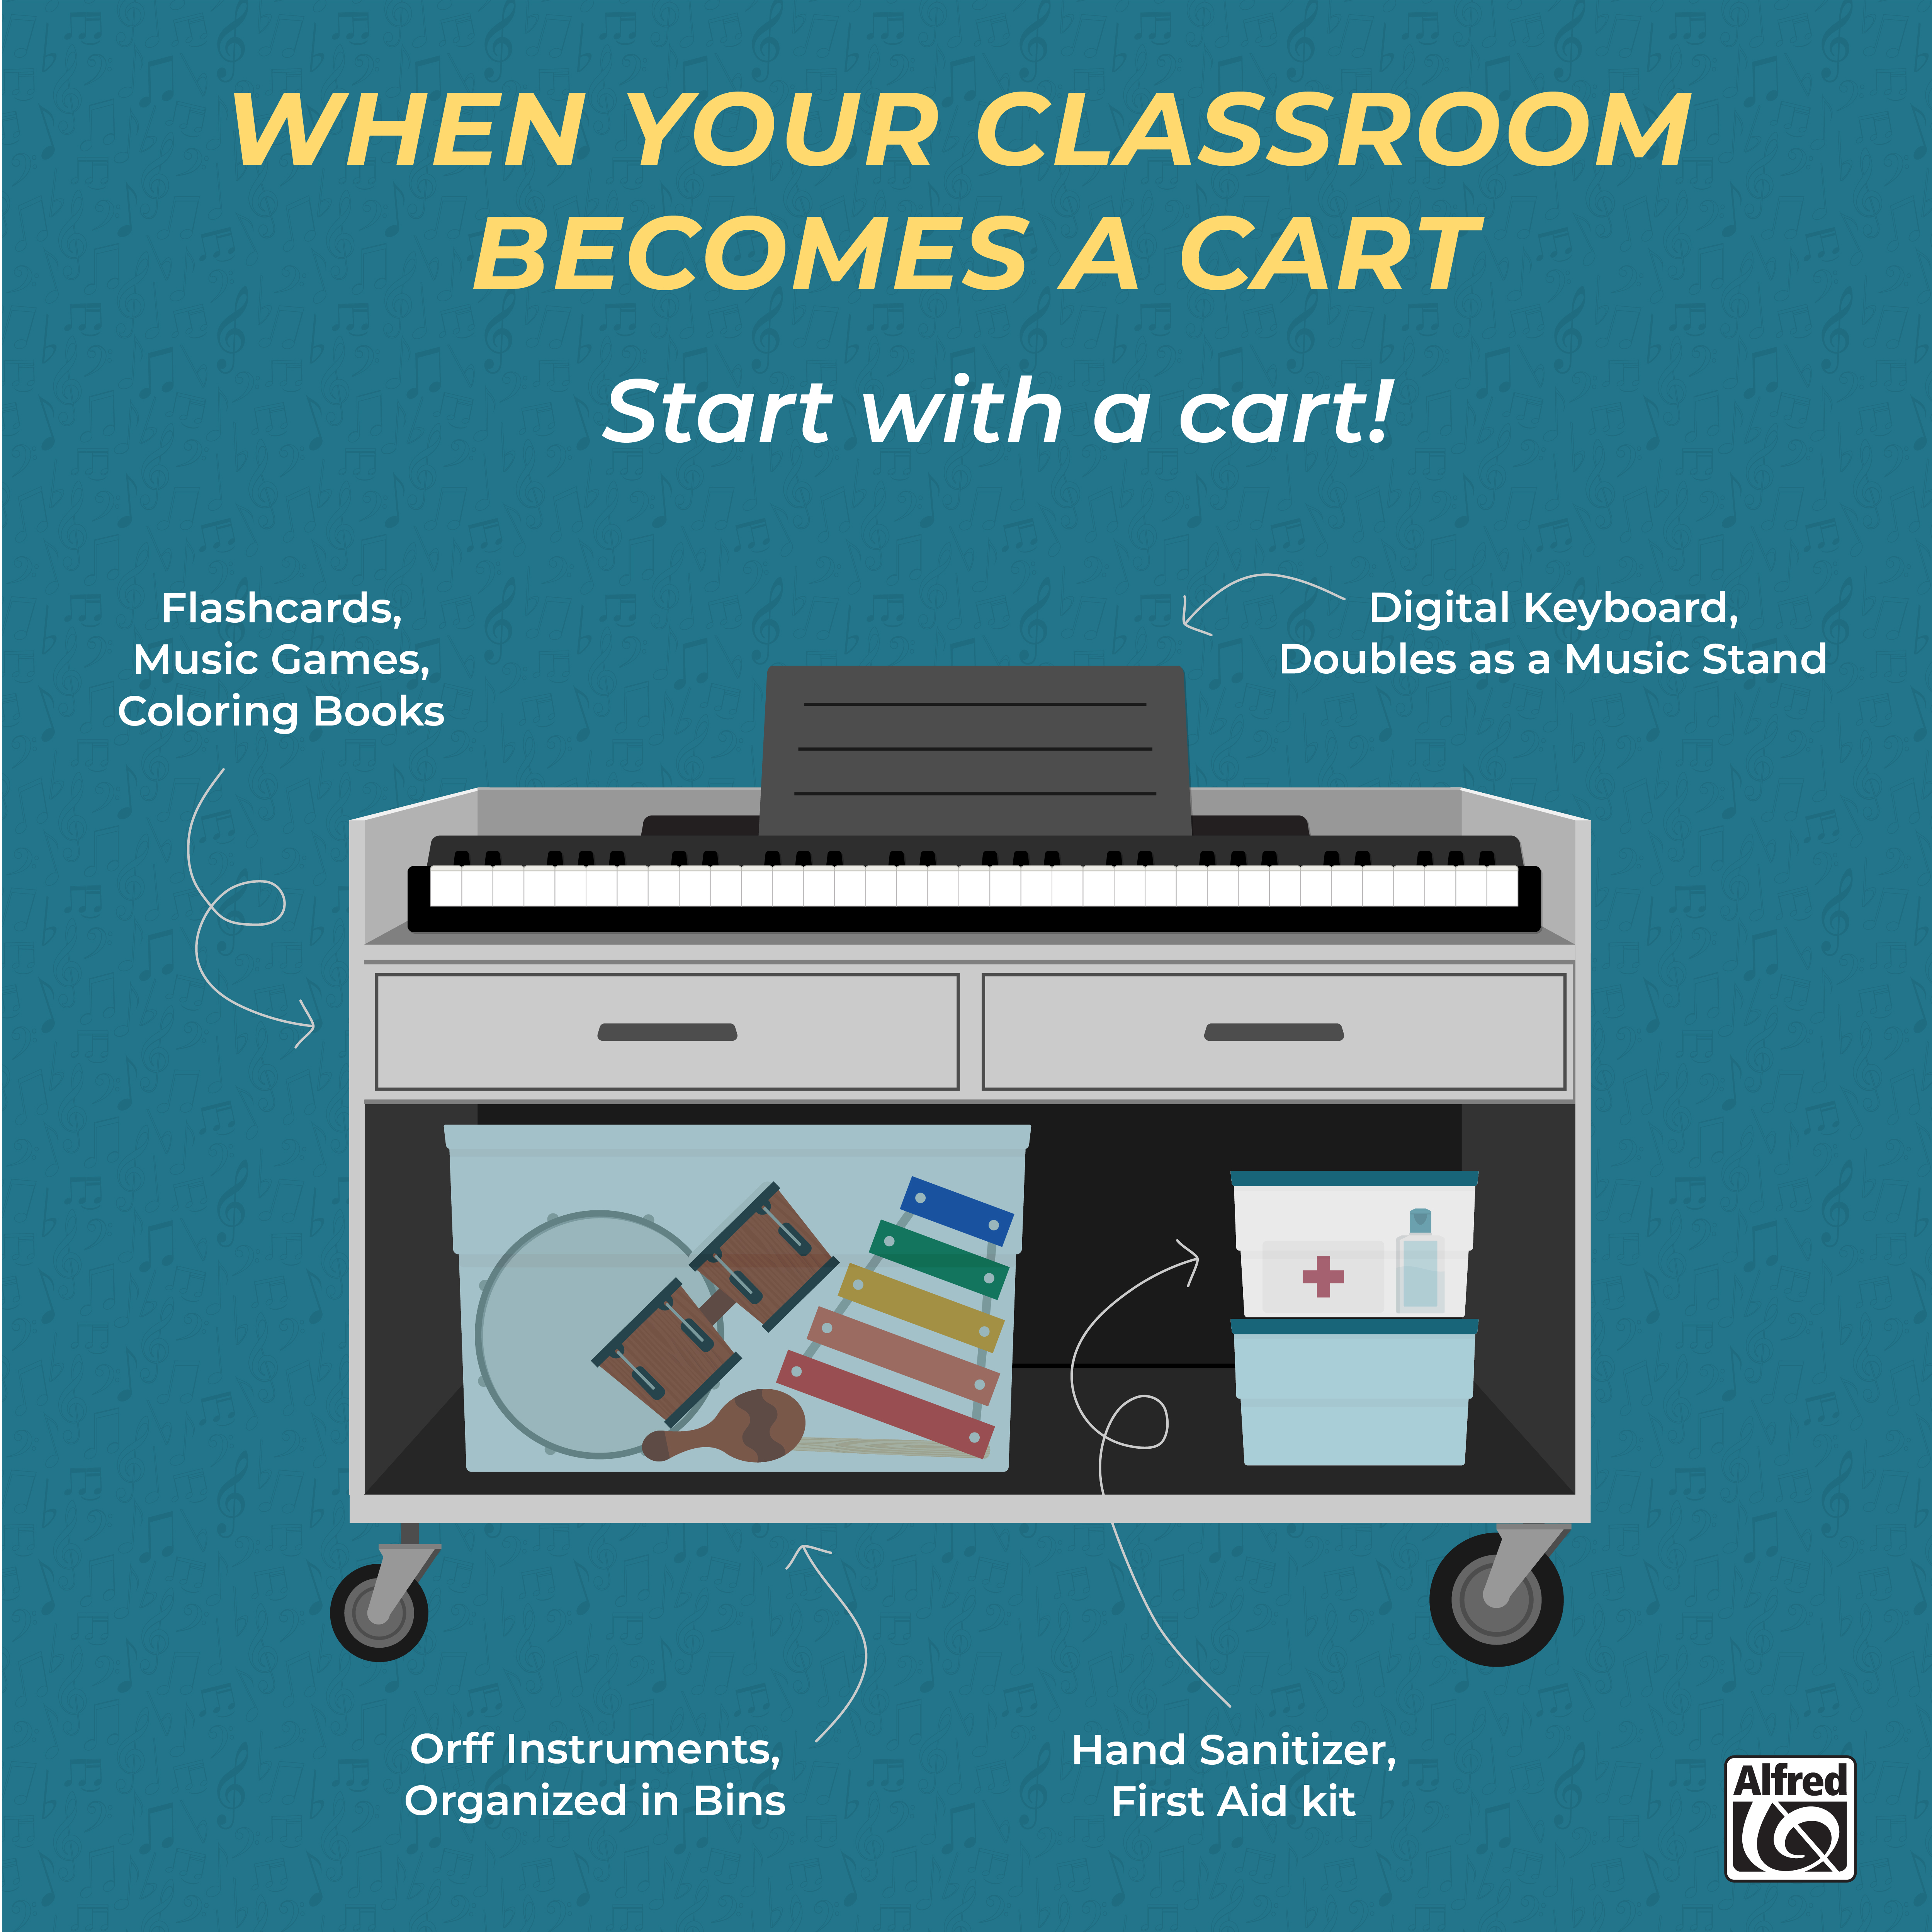 Classroom Becomes a Cart Infographic